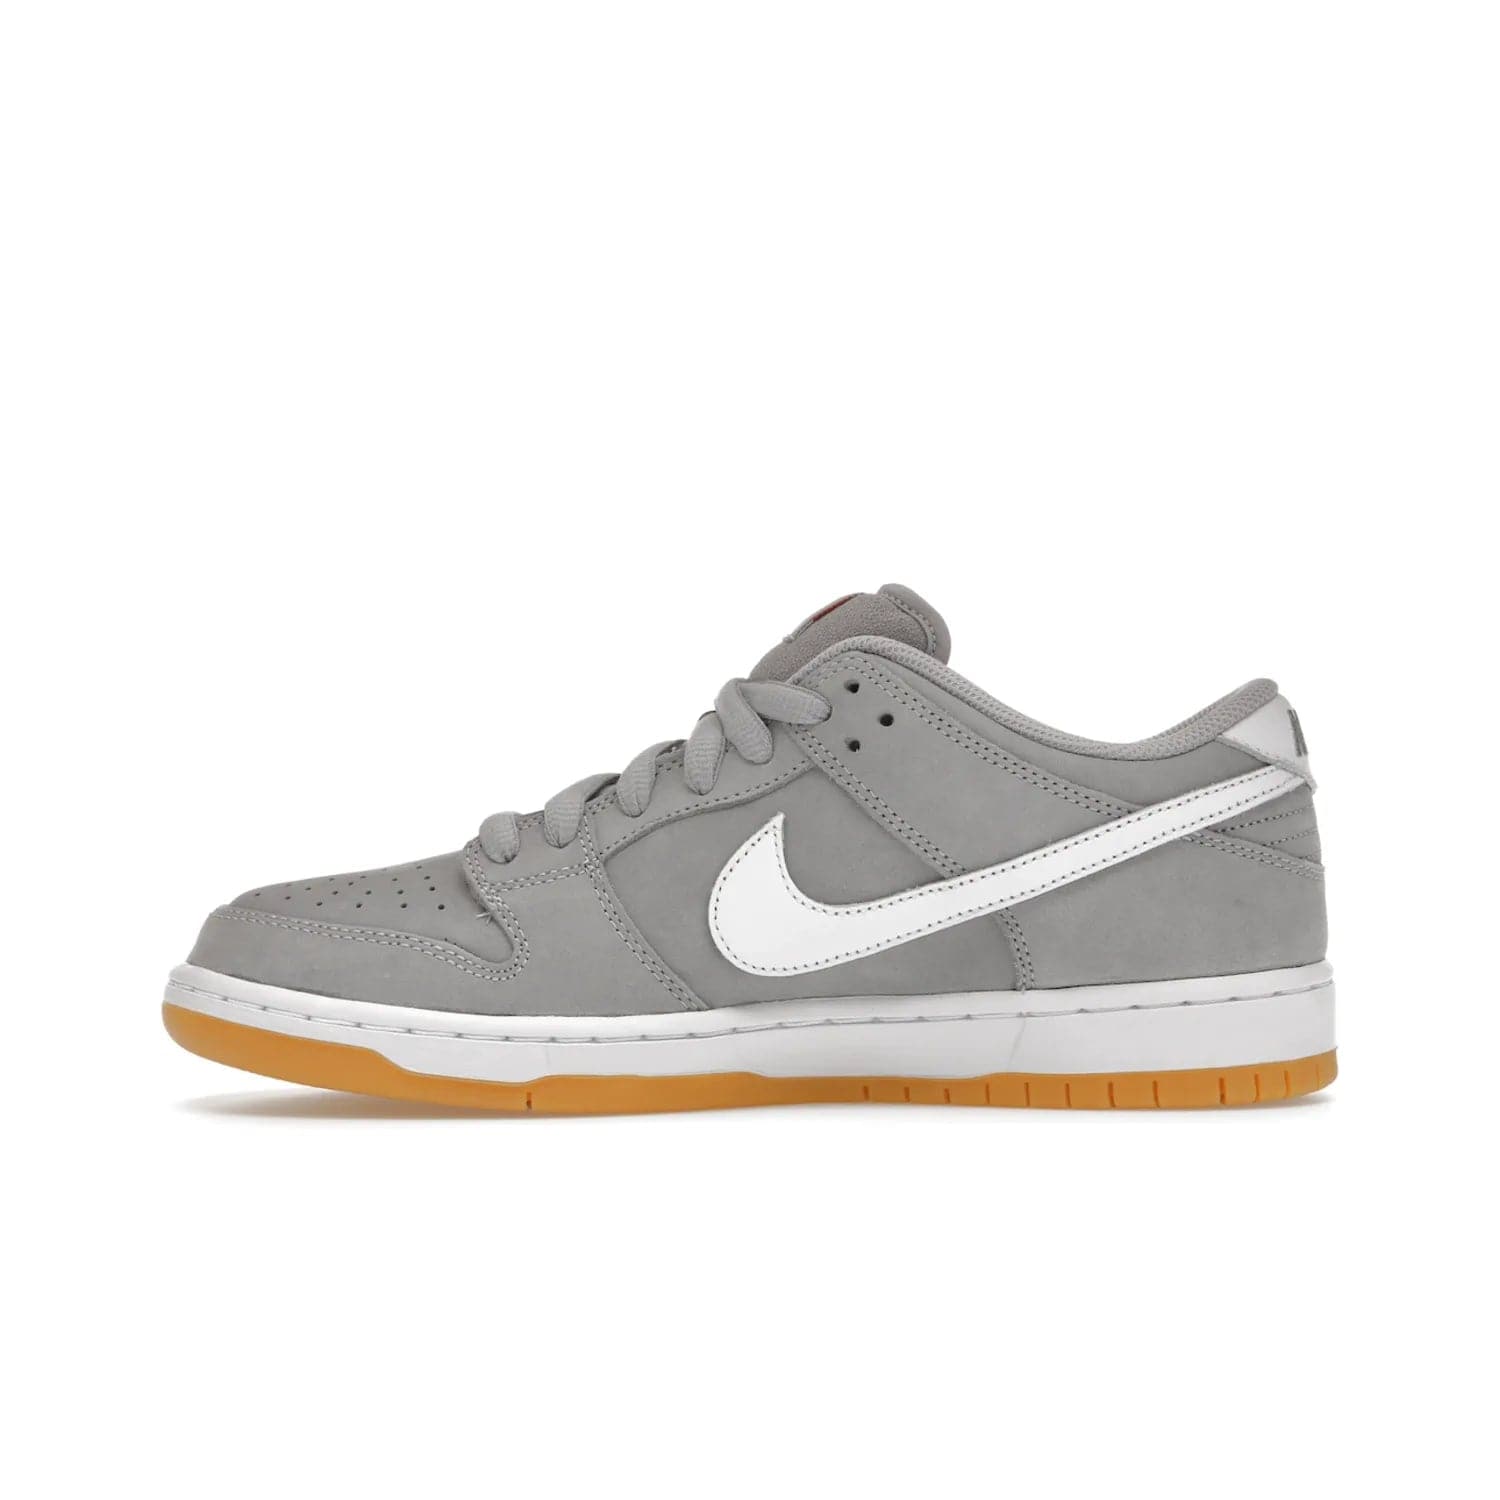 Nike SB Dunk Low Pro ISO Orange Label Wolf Grey Gum - Image 19 - Only at www.BallersClubKickz.com - Introducing Nike's SB Dunk Low Pro ISO Orange Label Wolf Grey Gum - a stylish shoe with a premium Wolf Grey upper, white leather Nike Swoosh, and an eye-catching gum outsole. With special Nike branding and packaging, this shoe adds a unique fashion statement. Out Feb. 24, 2023.